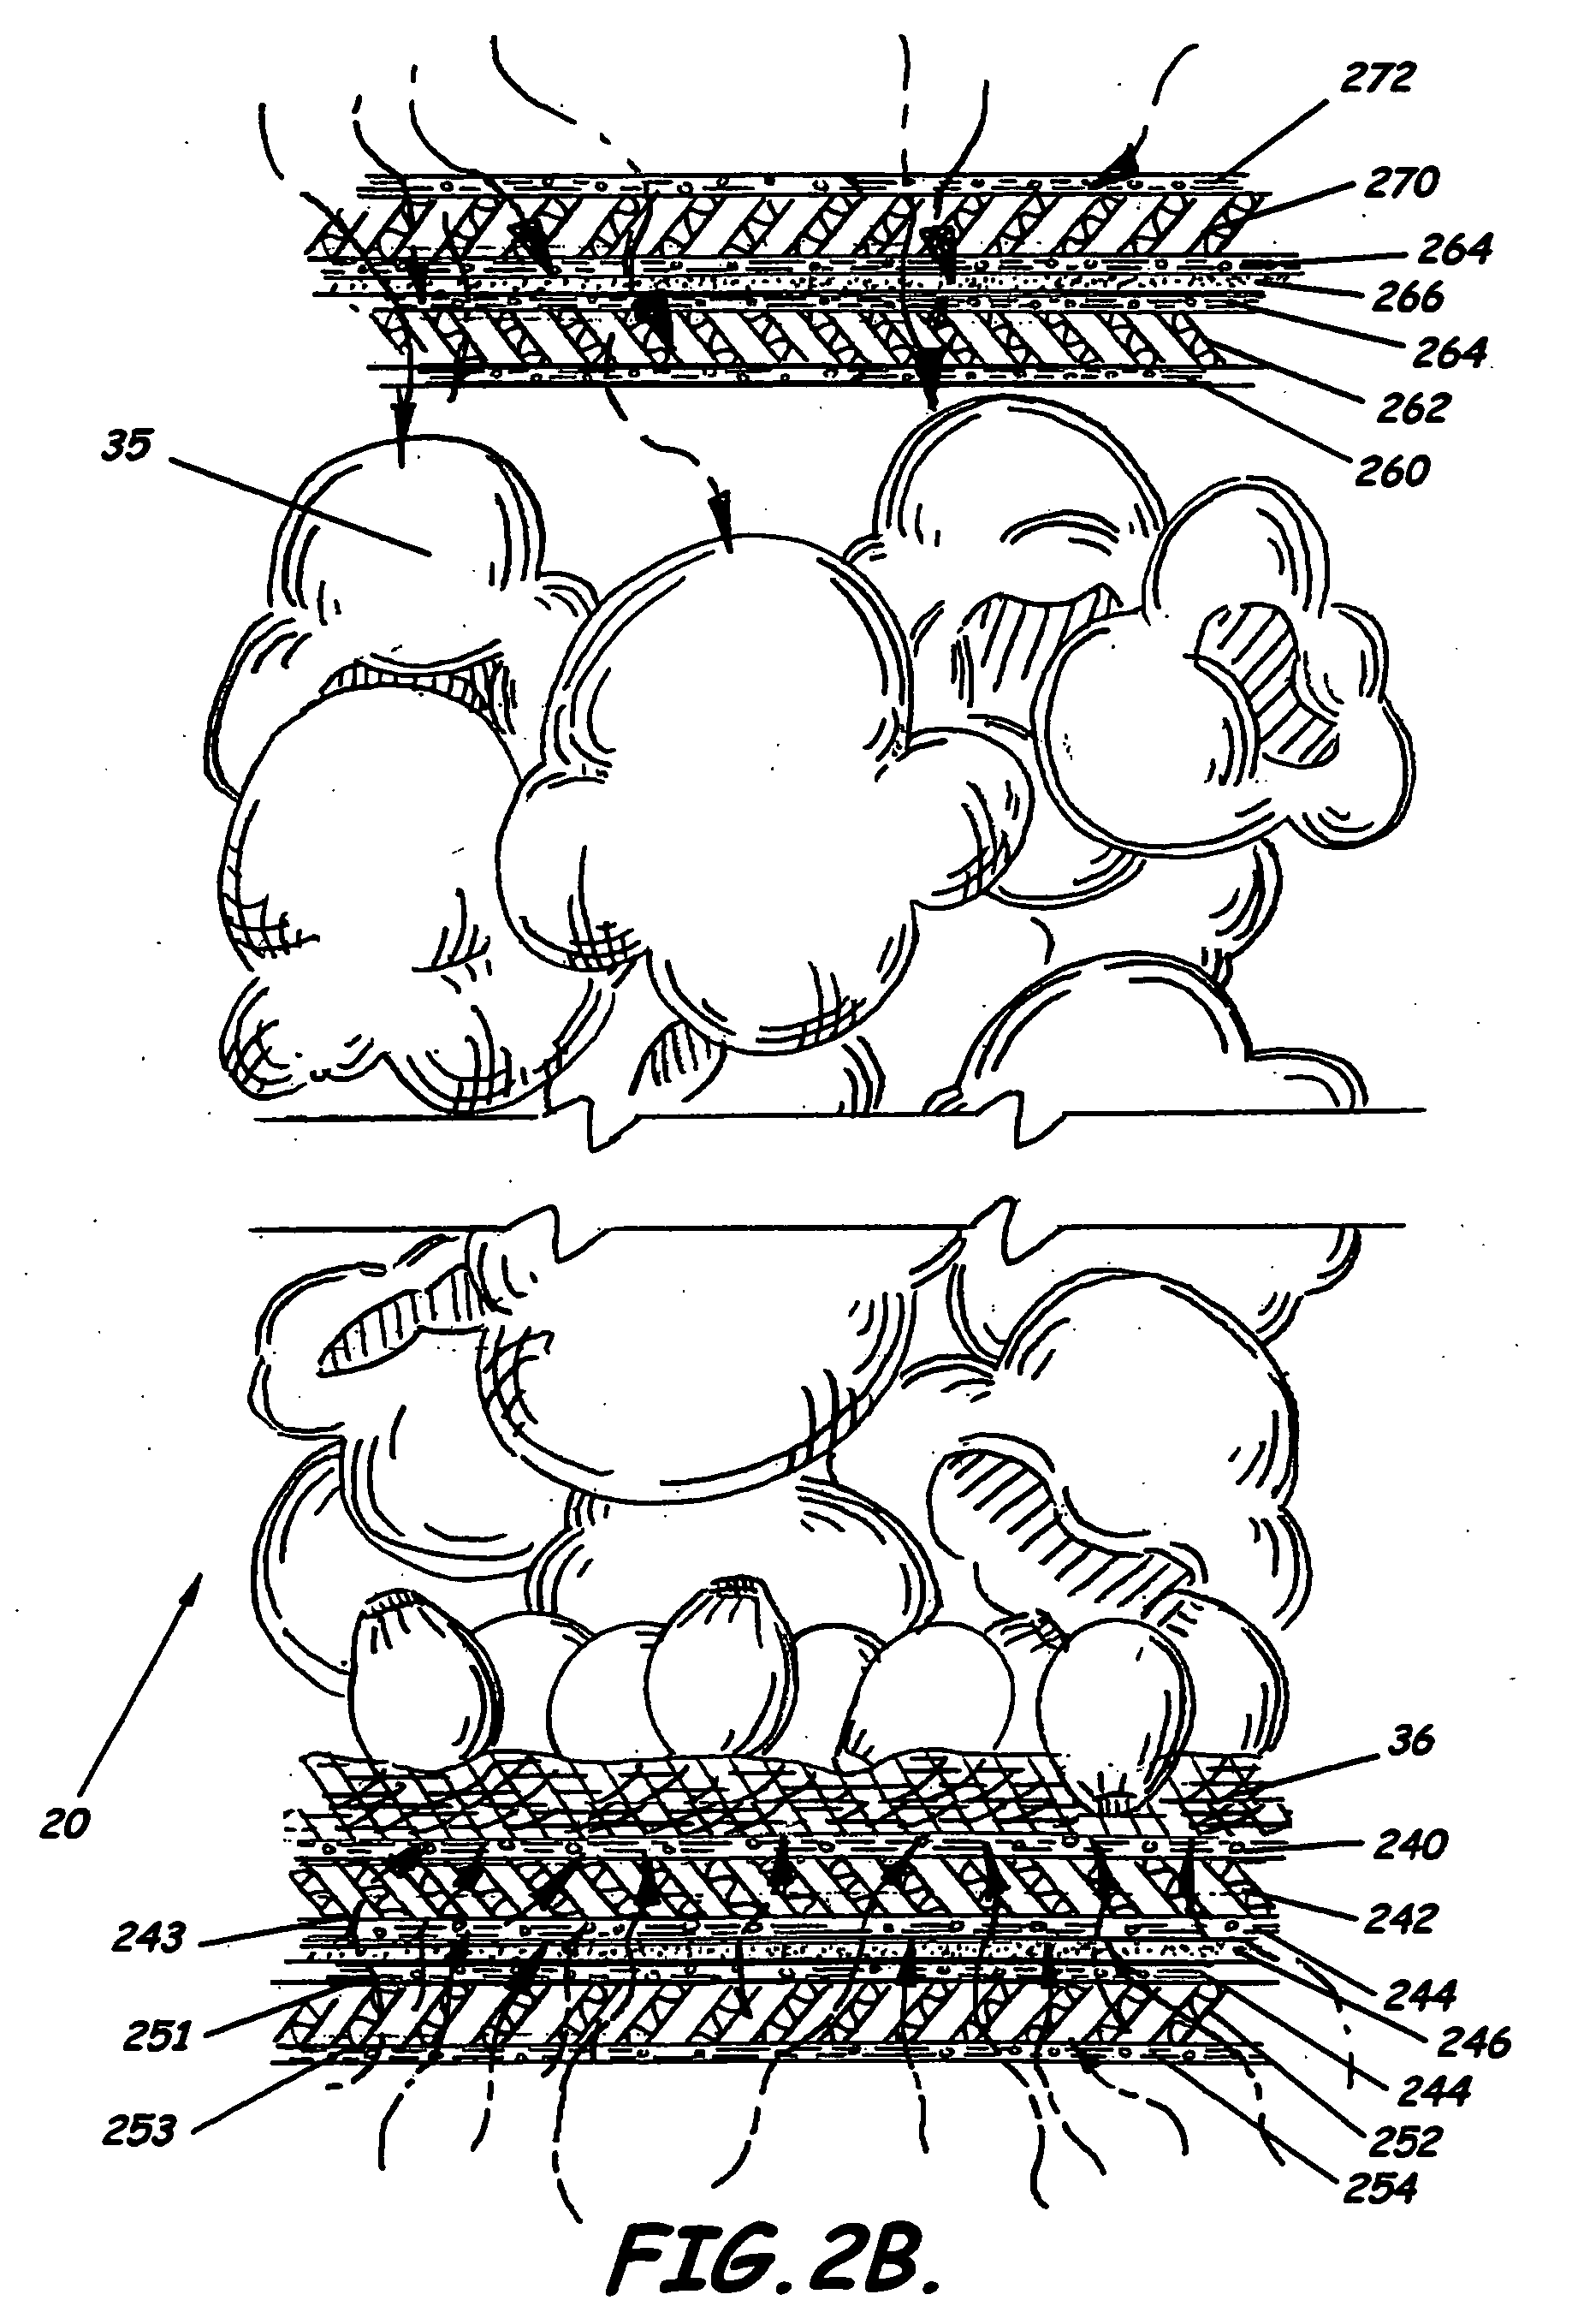 Non-fluorocarbon high temperature packaging having flexible starch-based film and methods of producing same